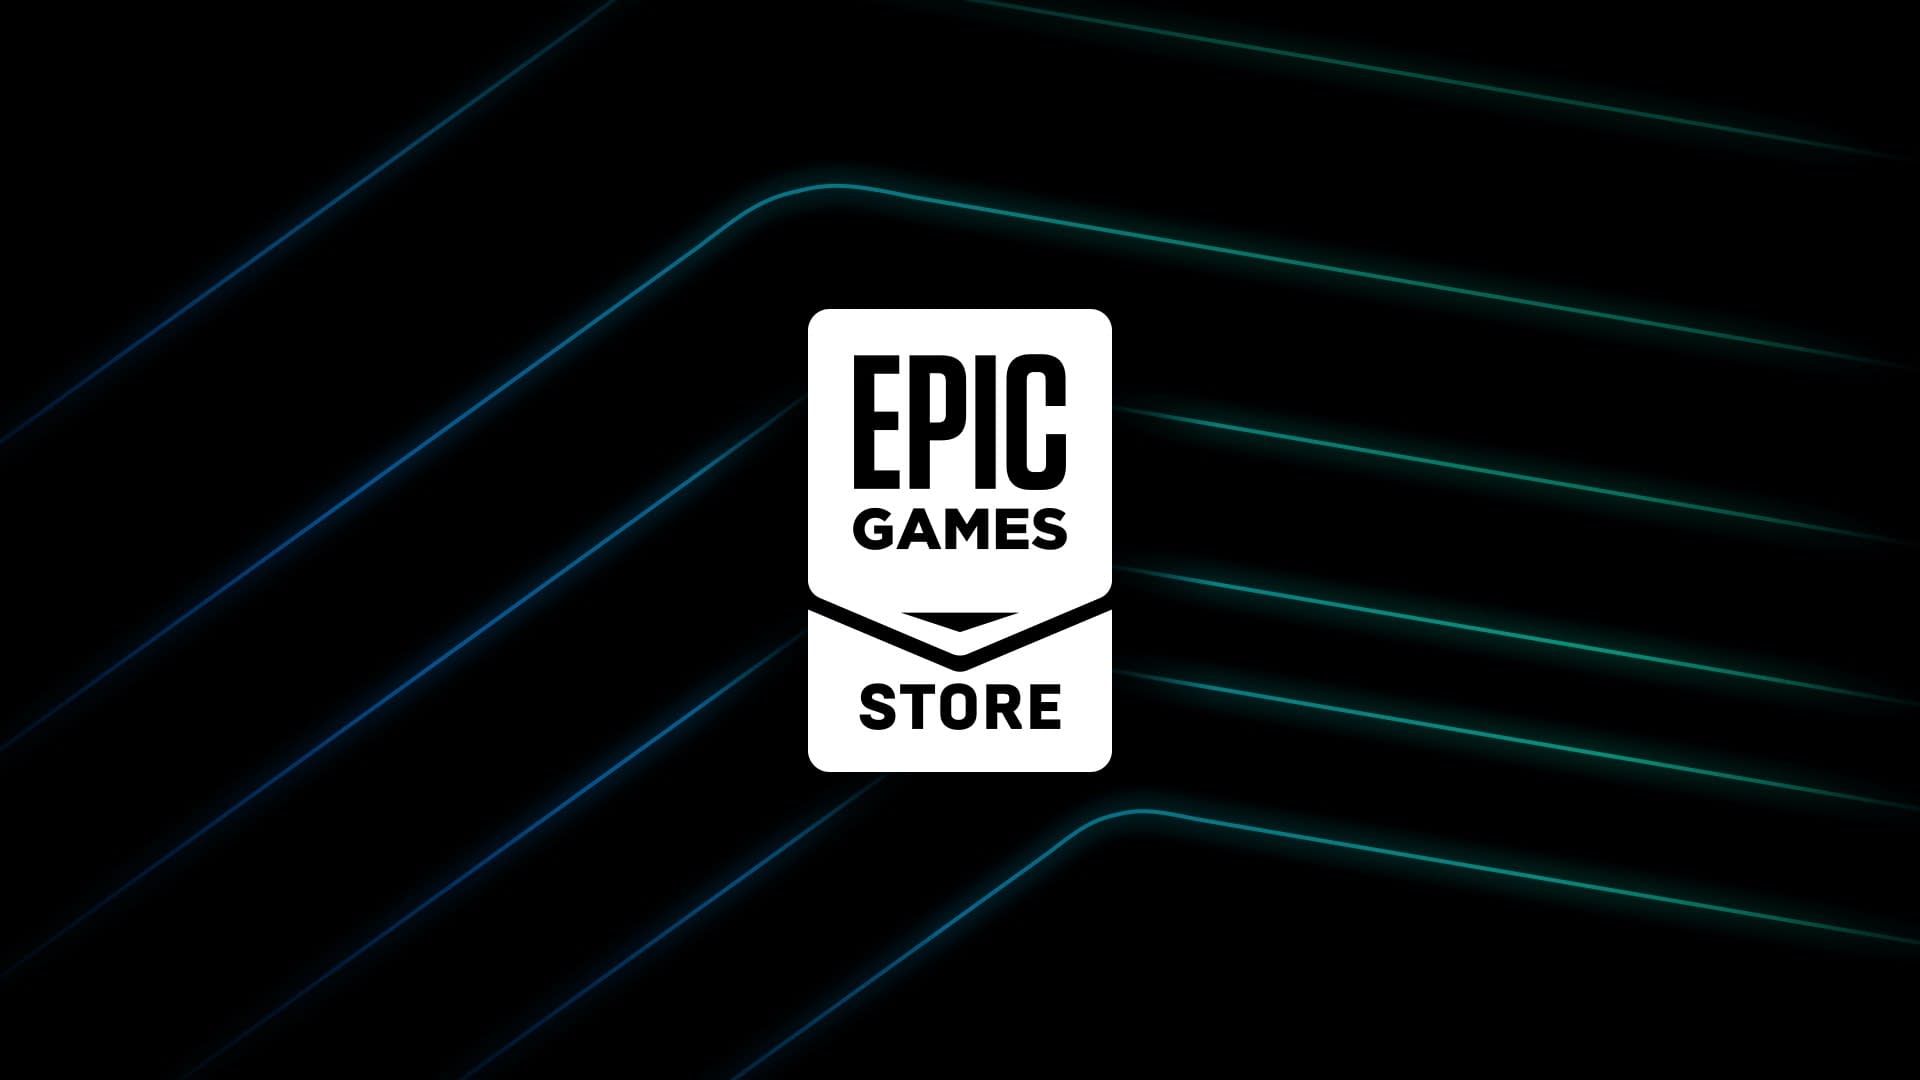 Epic Games This Week 82 Tl’s Game Free Data